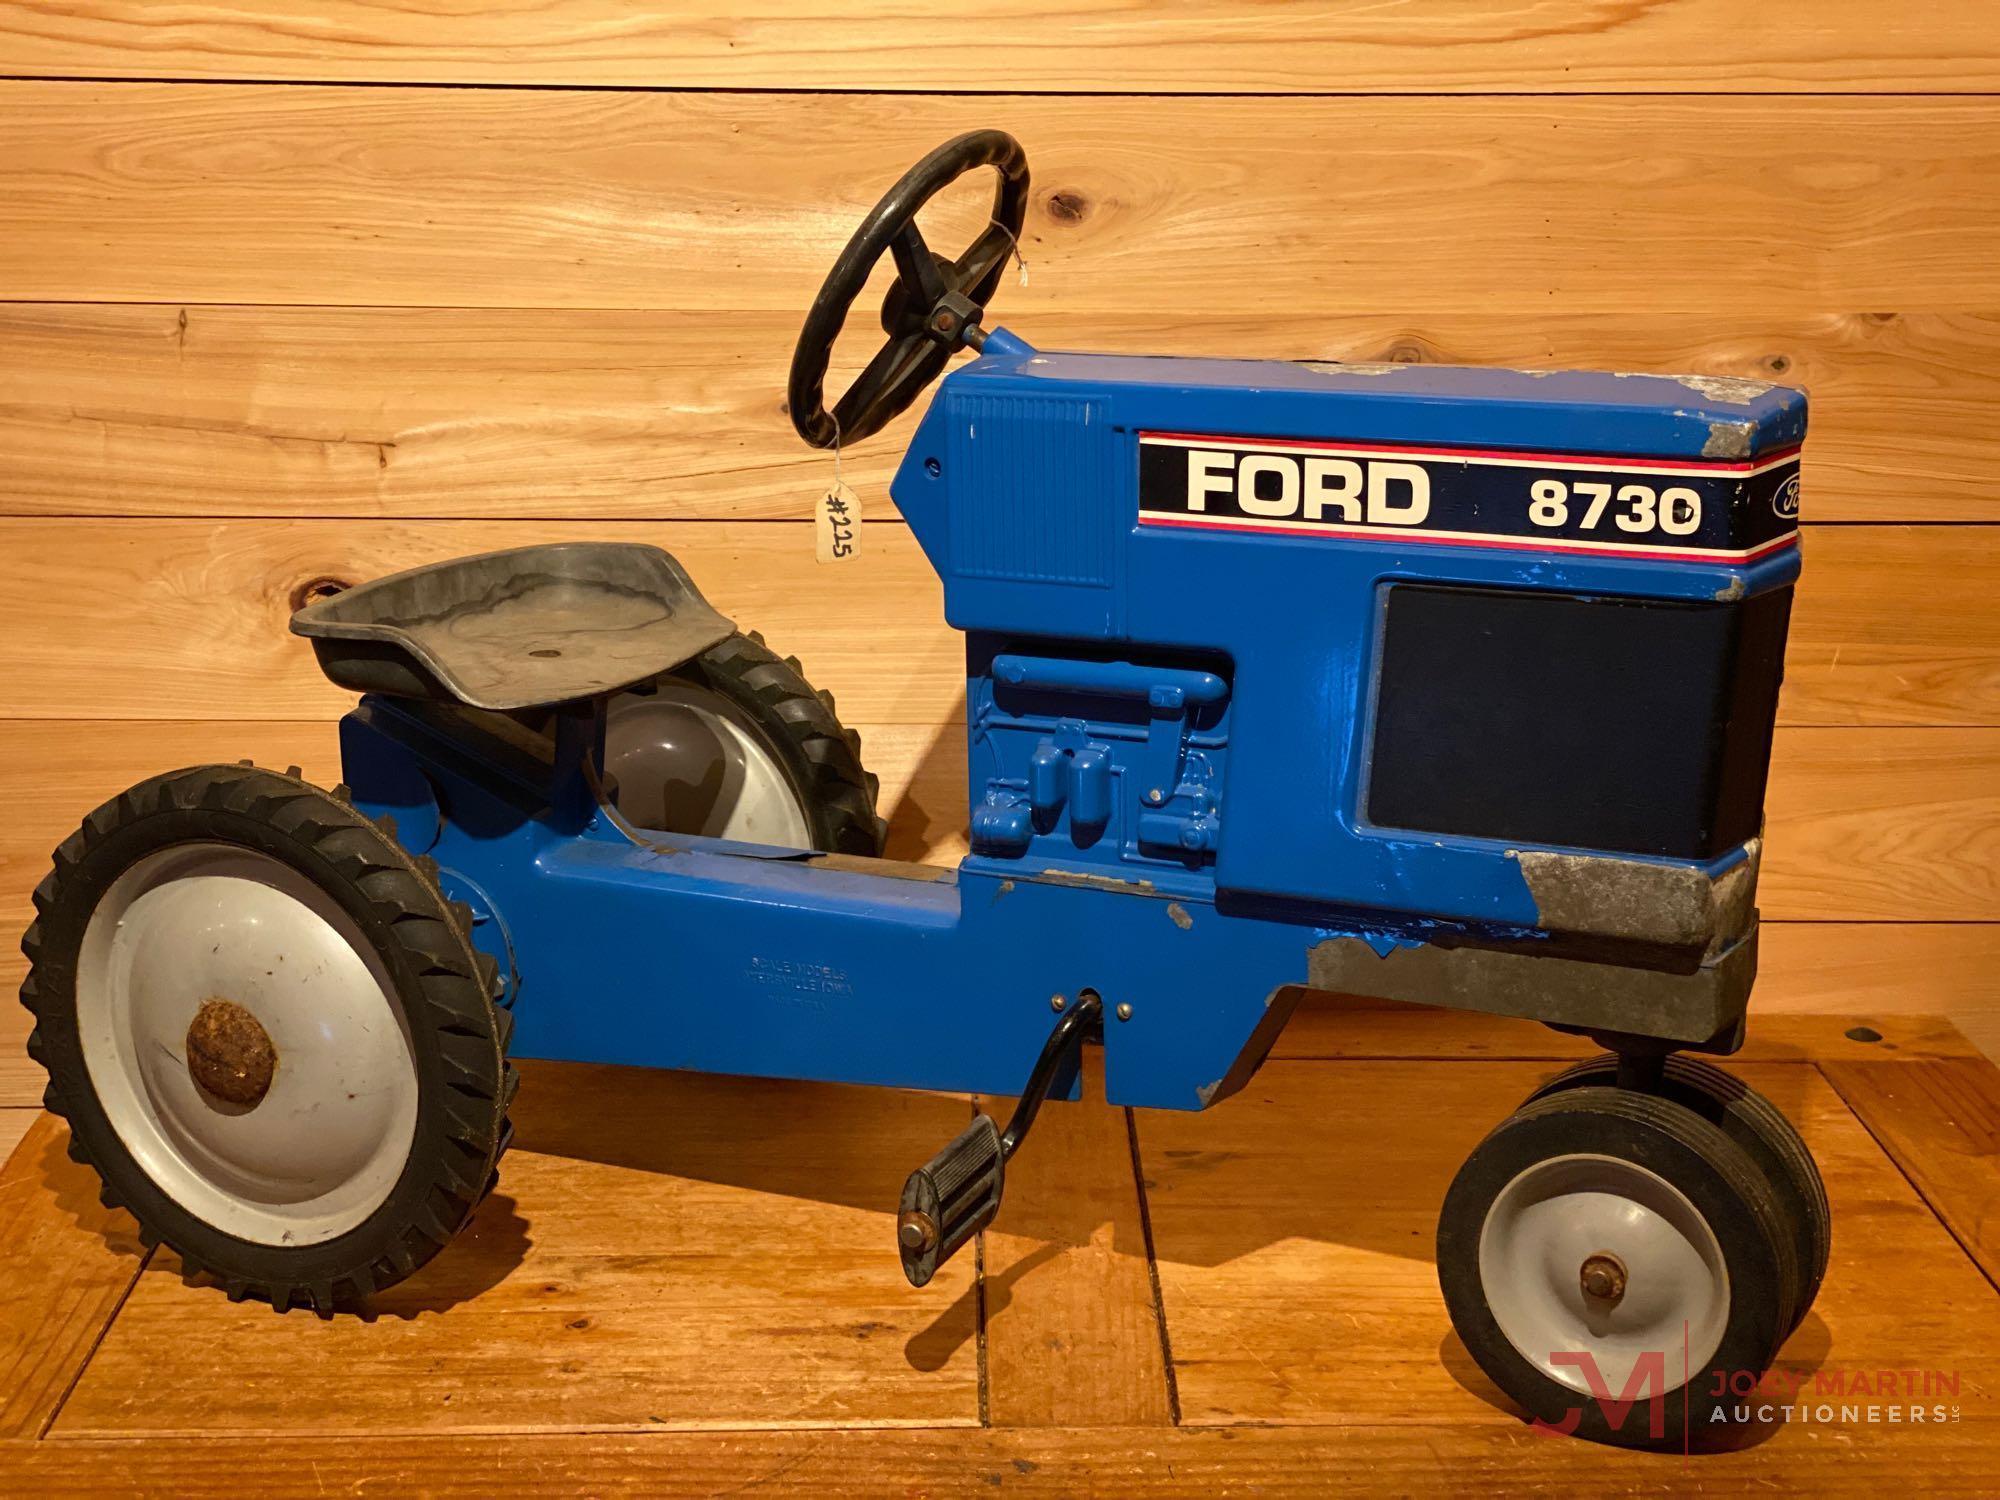 FORD 8730 PEDAL TRACTOR(hard to turn steering wheel)